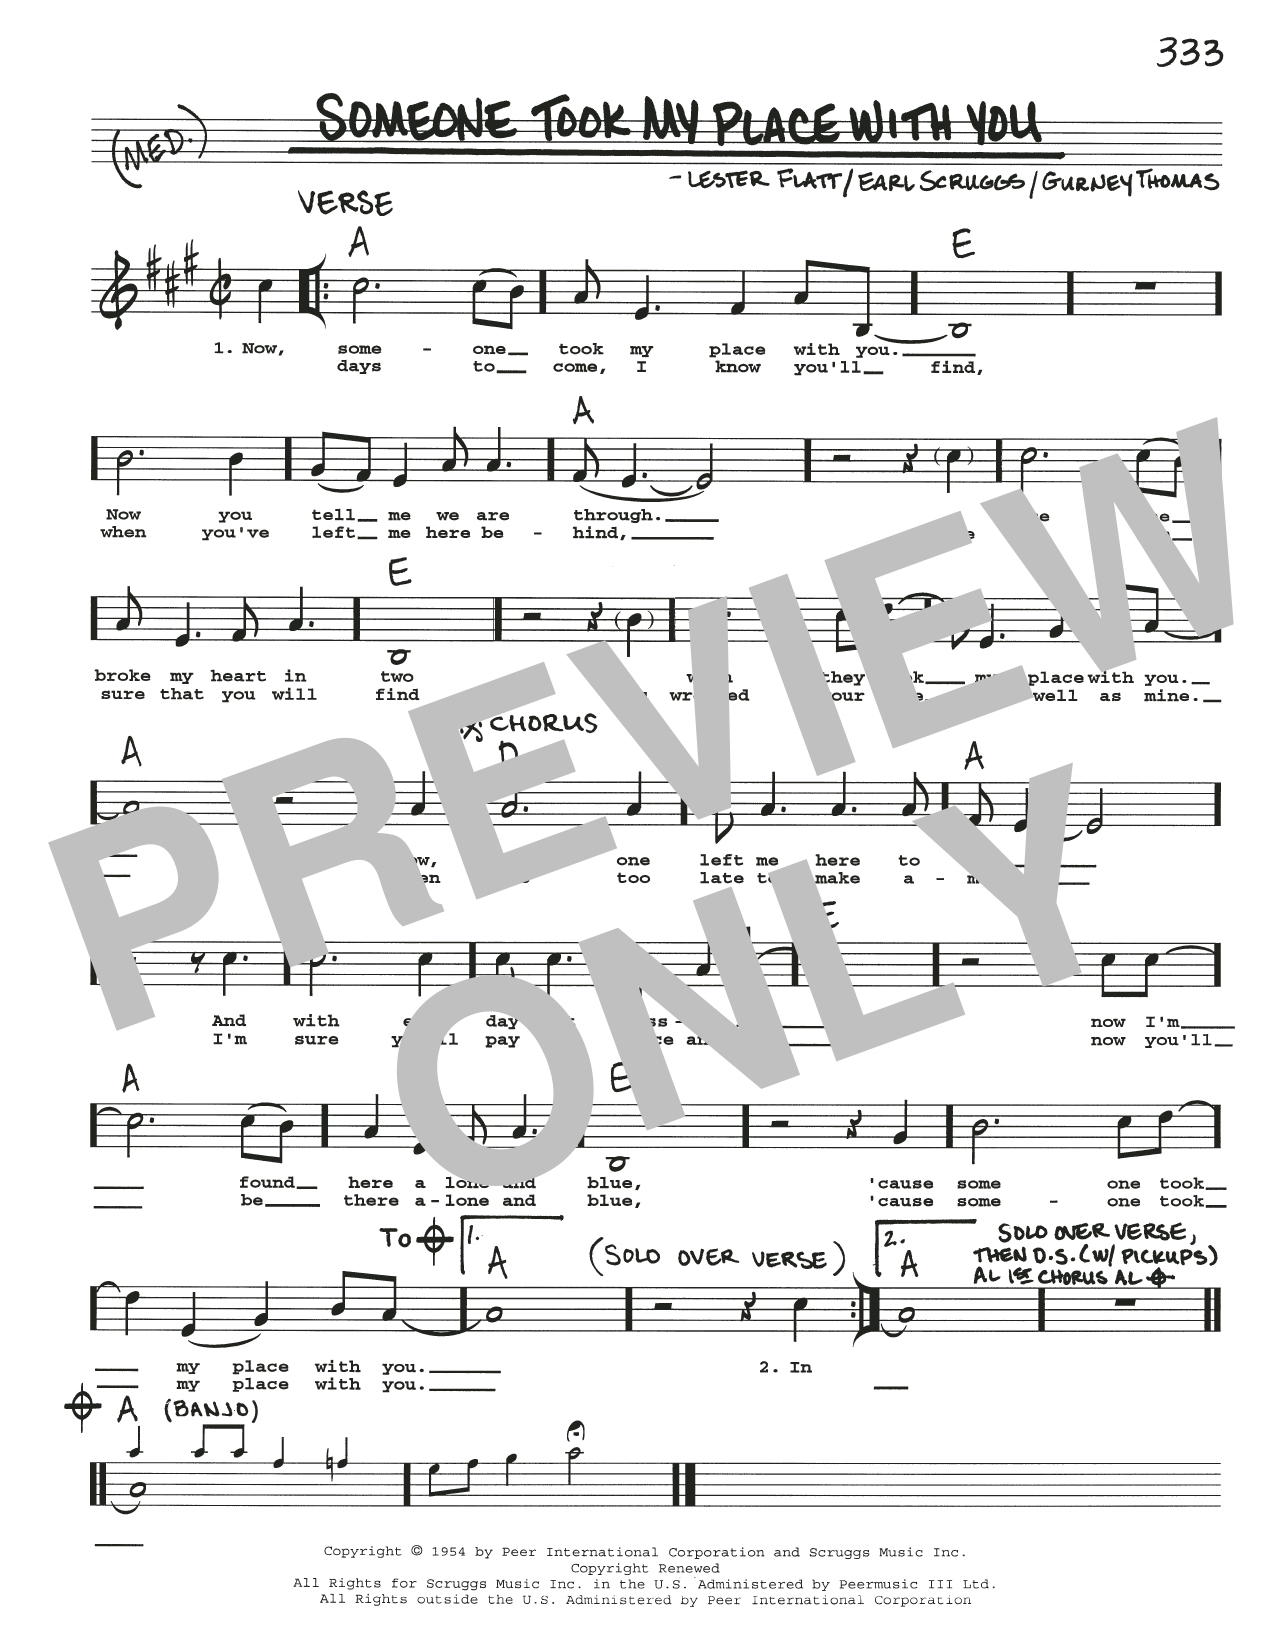 Download Flatt & Scruggs Someone Took My Place With You Sheet Music